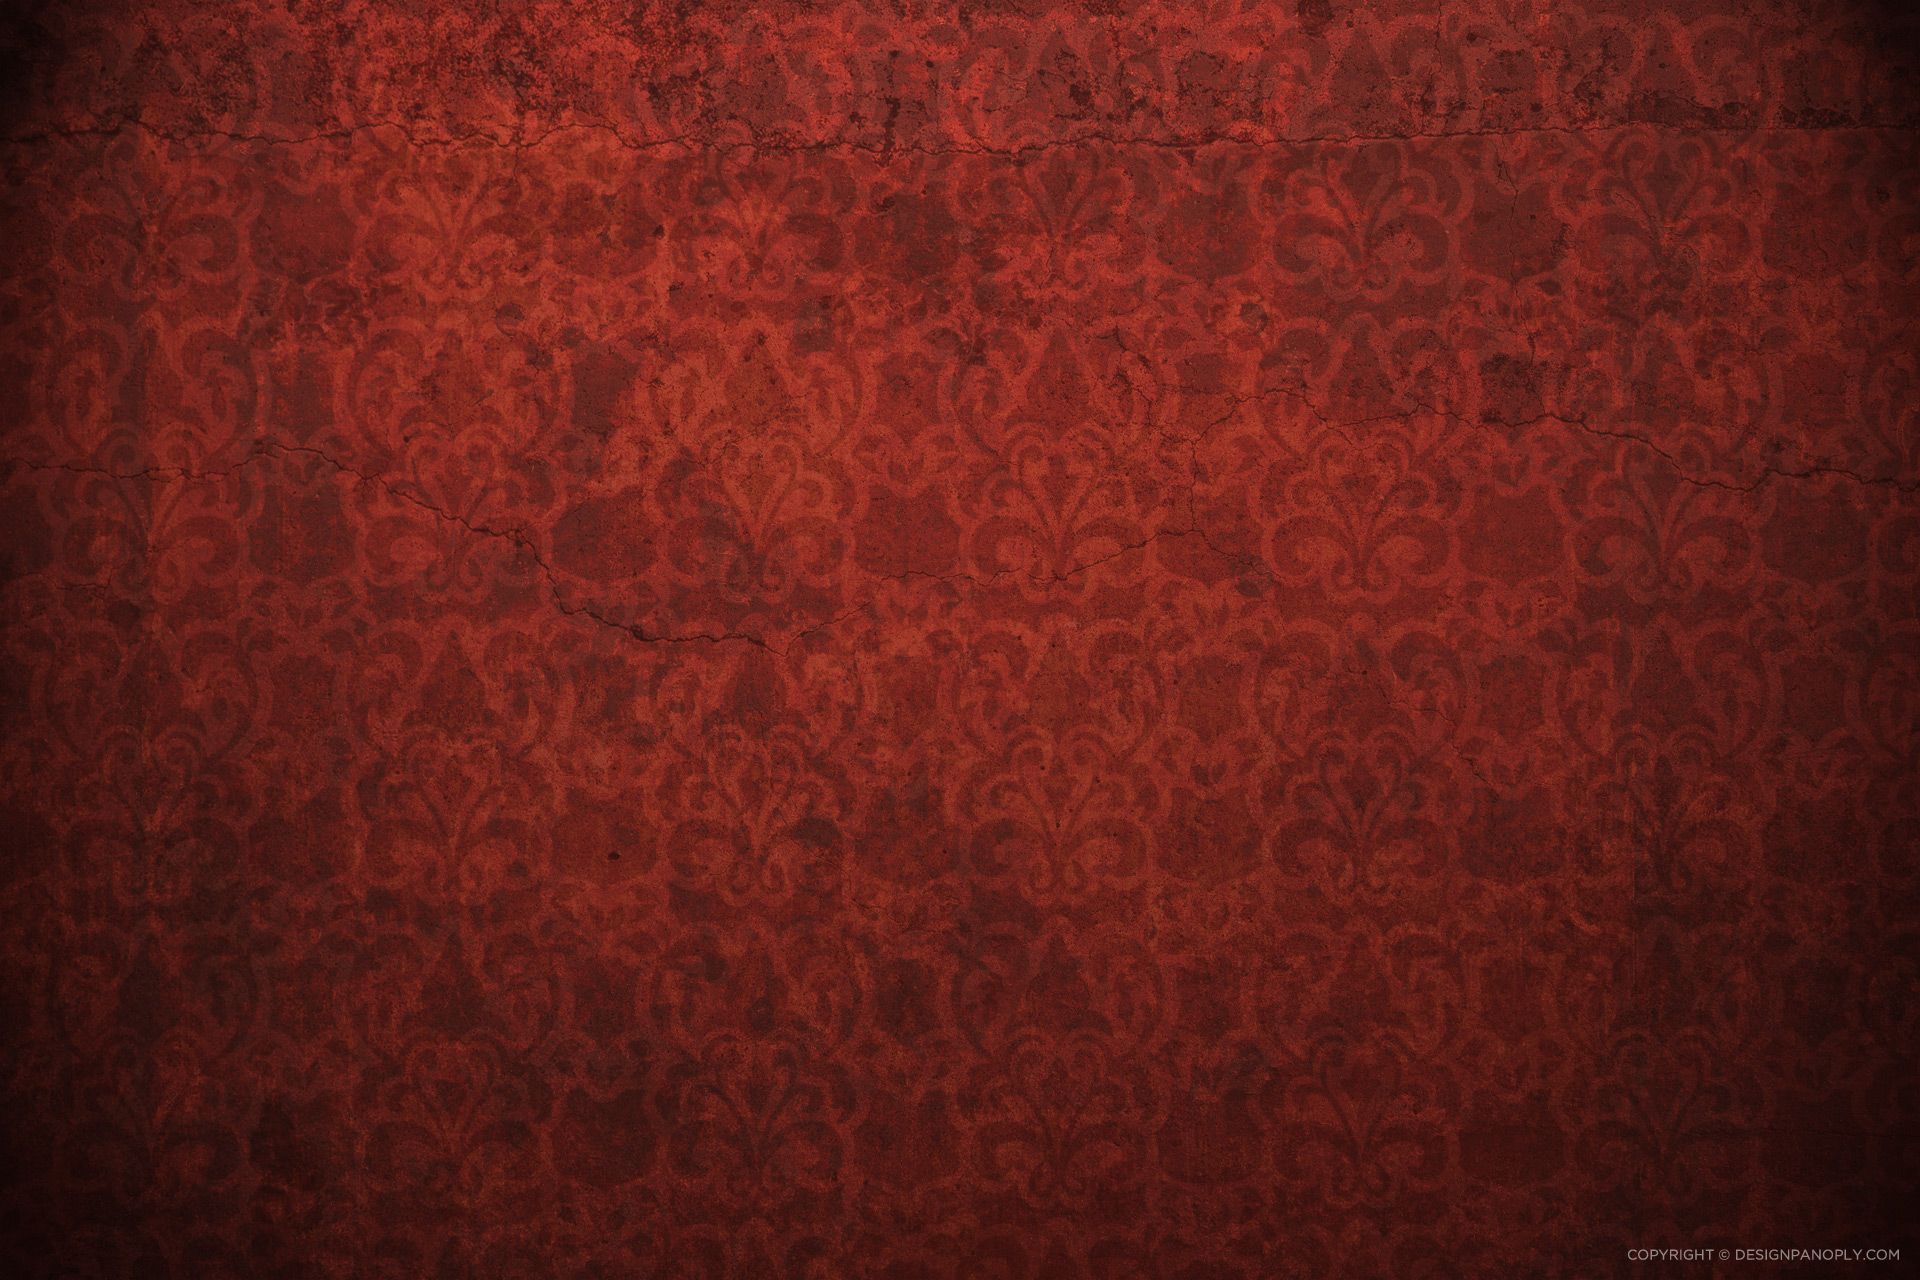 Background Textures Group (74+)